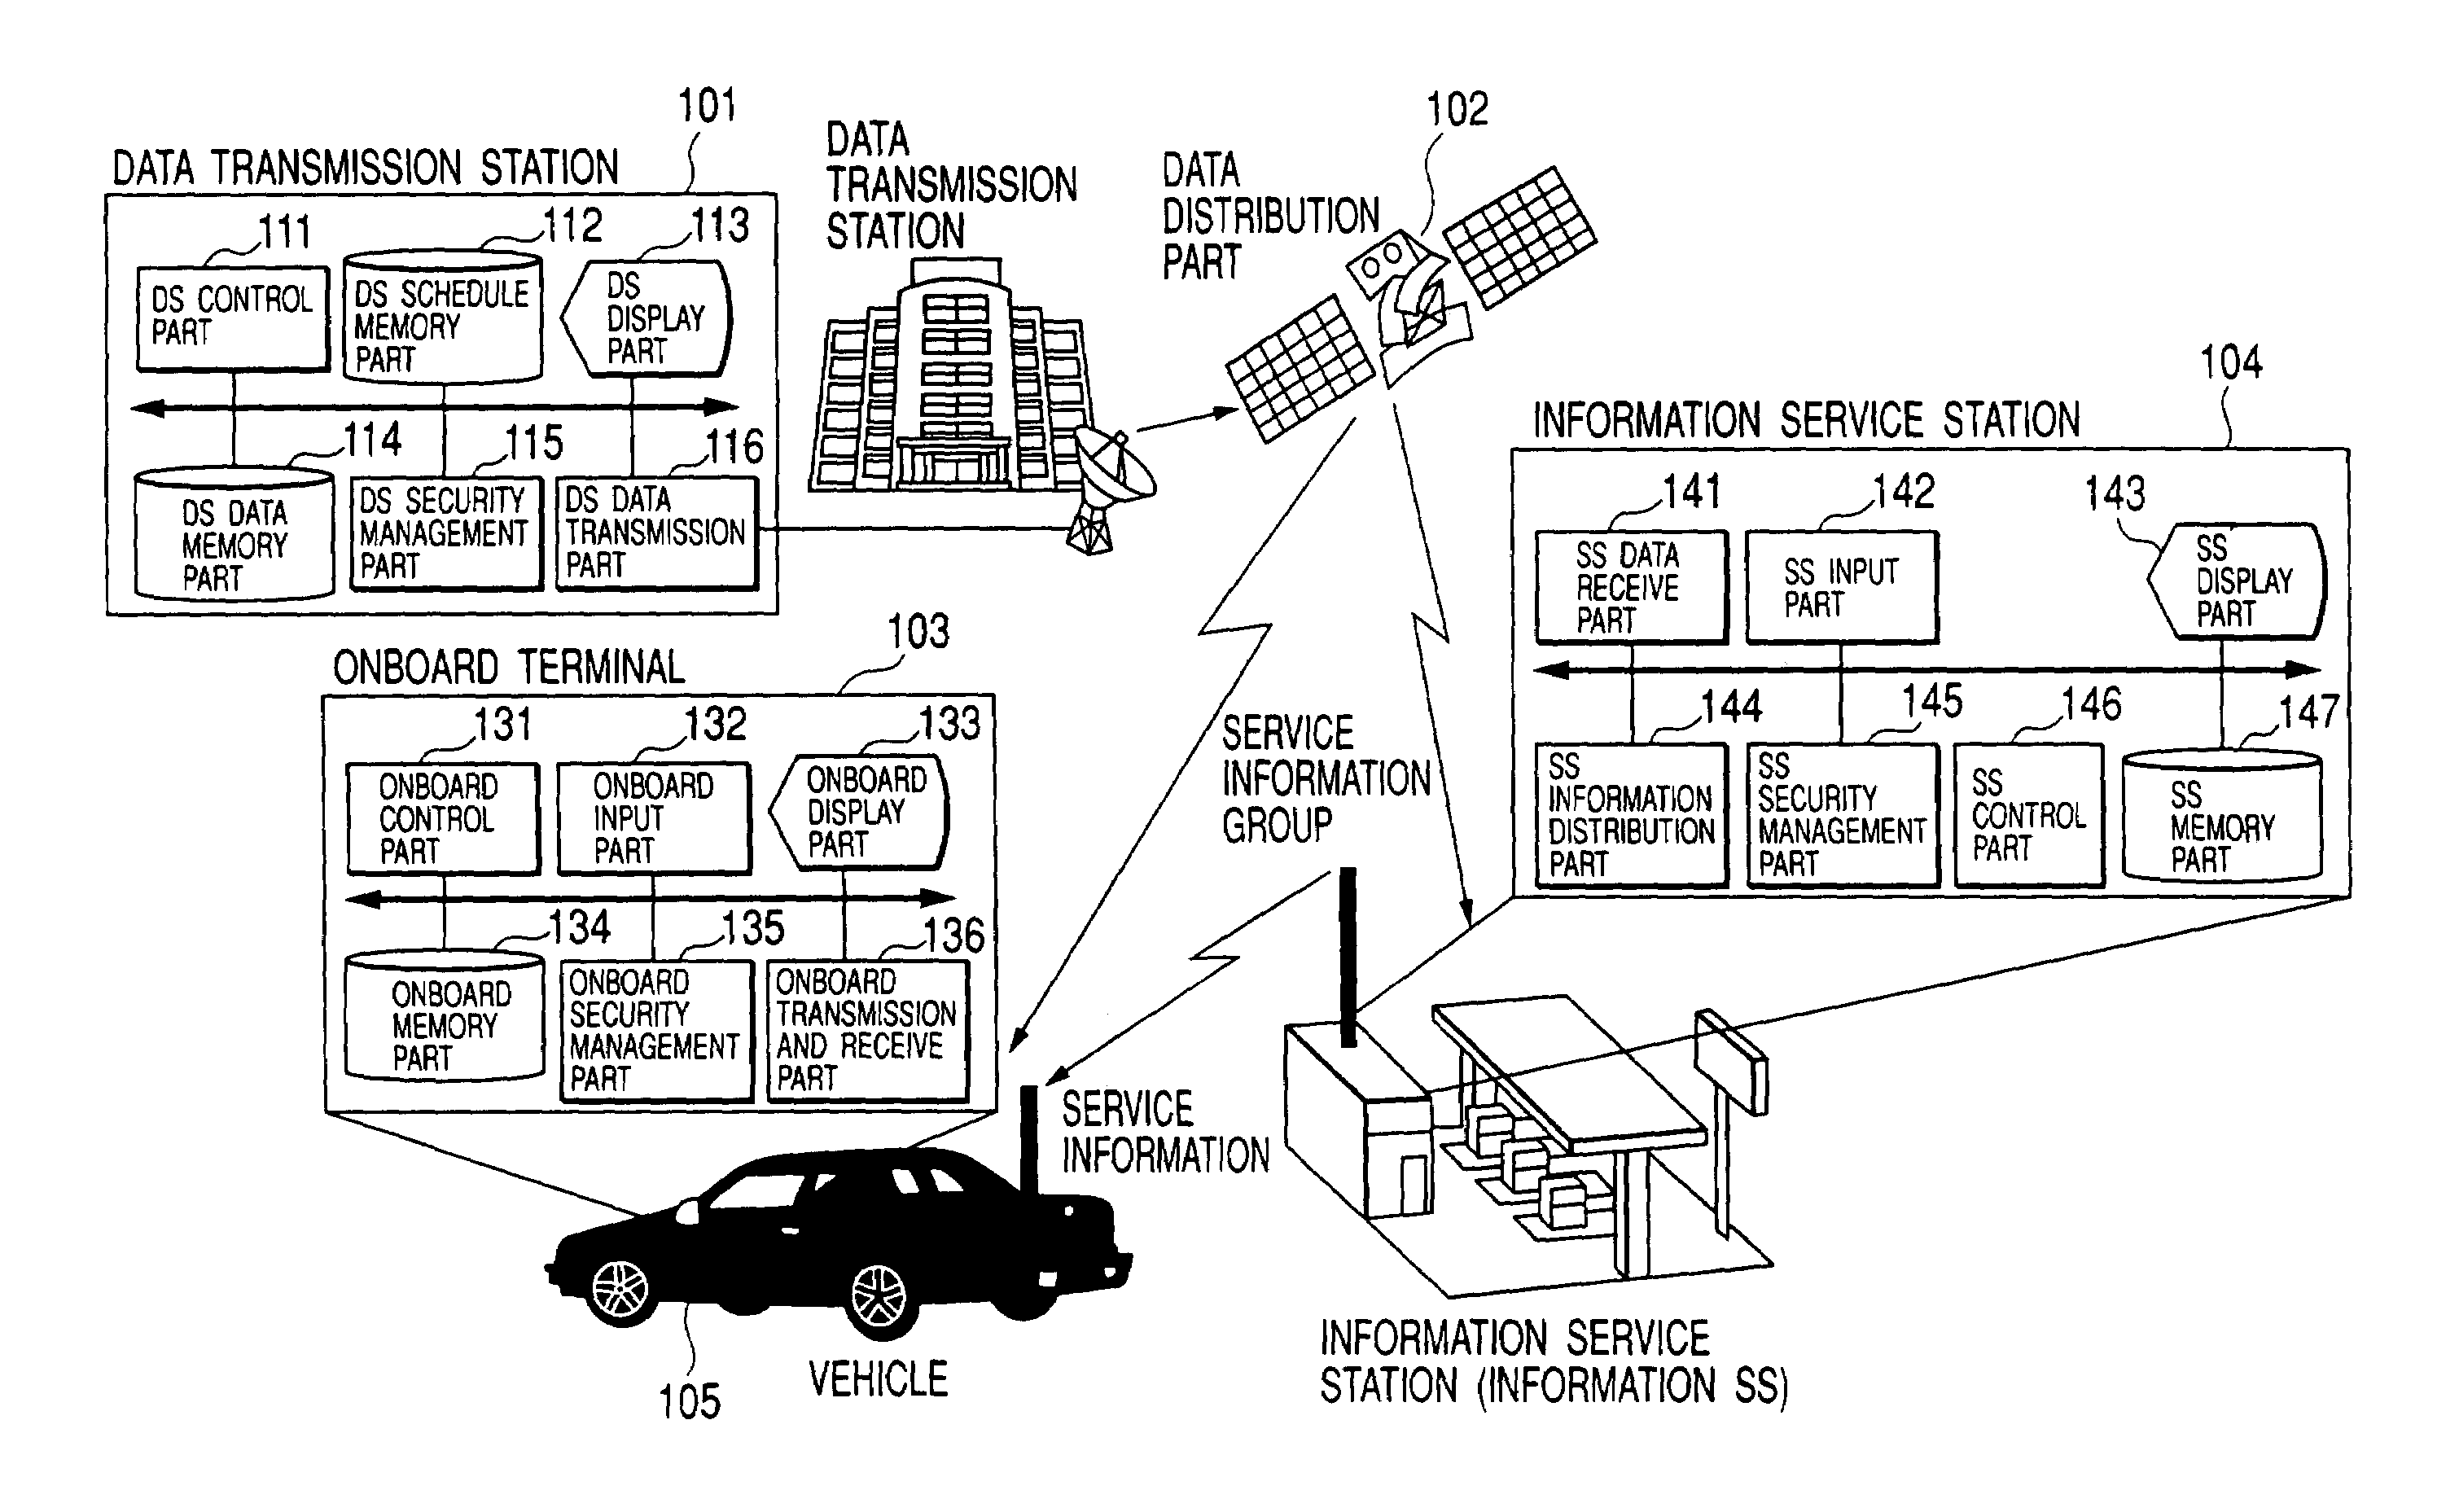 Digital broadcasting system for providing program and data to a vehicle